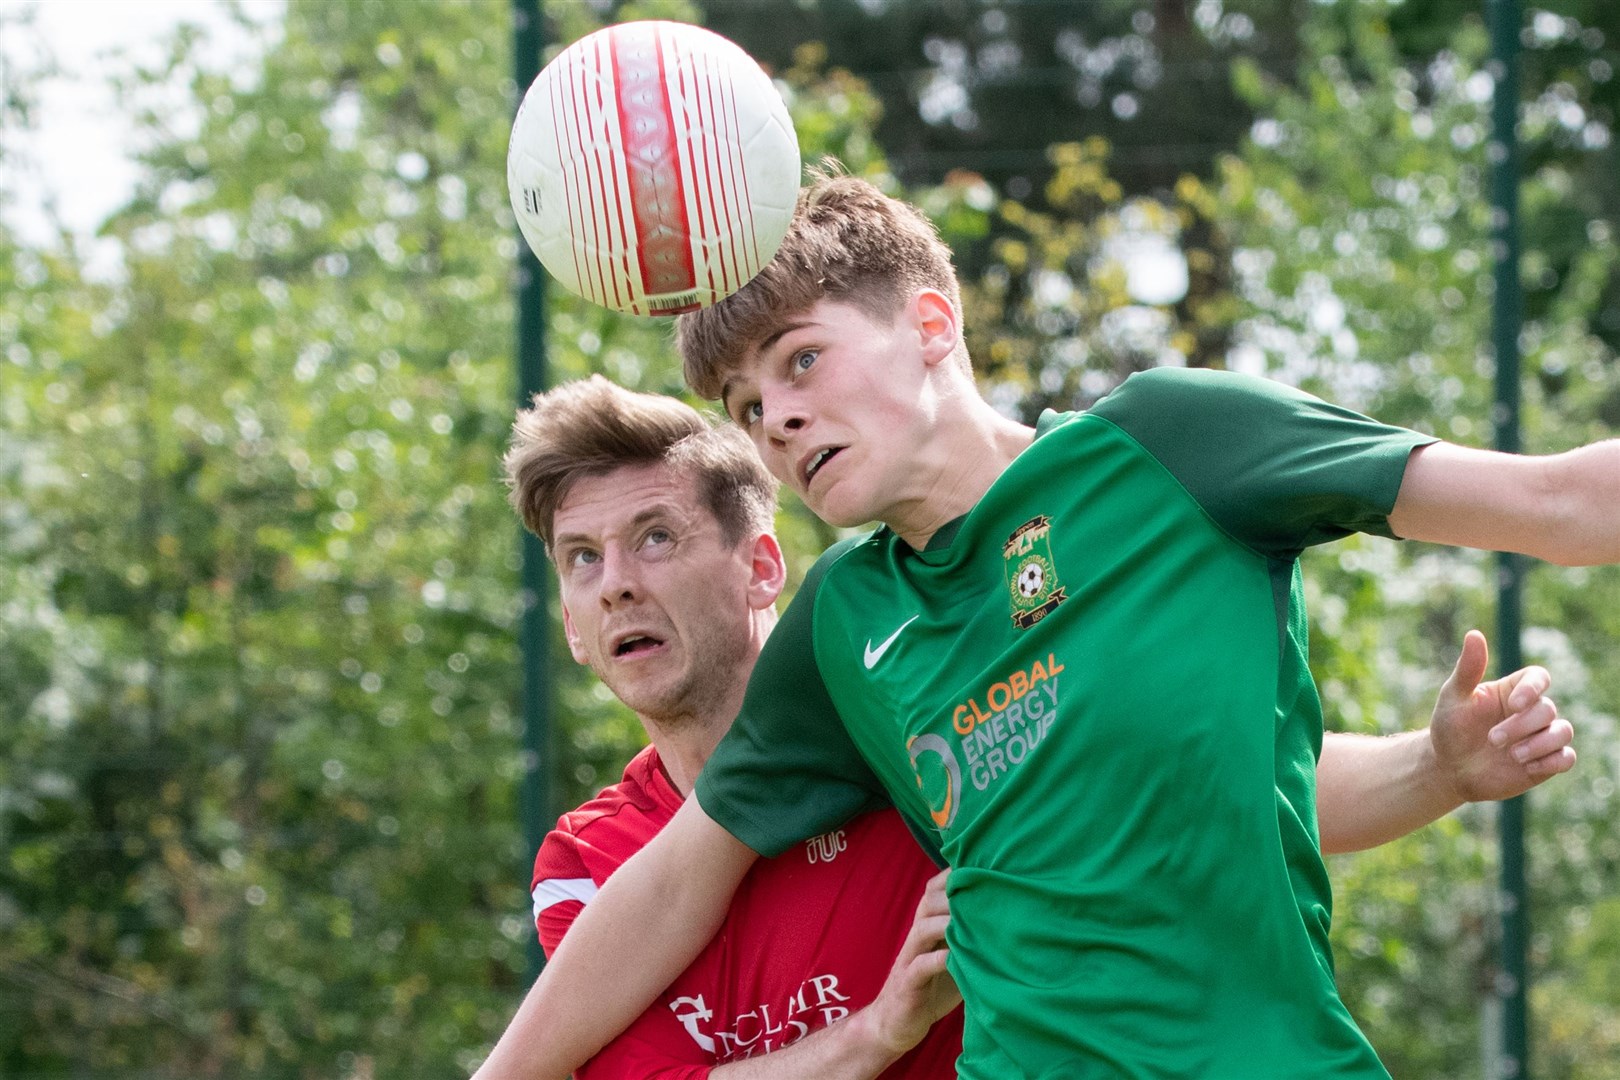 Forres' Neil Moir and Dufftown's Aiden Cruickshank compete for the ball...Dufftown FC (2) vs Forres Thistle FC (2) - Dufftown FC win 5-3 on penalties - Elginshire Cup Final held at Logie Park, Forres 14/05/2022...Picture: Daniel Forsyth..